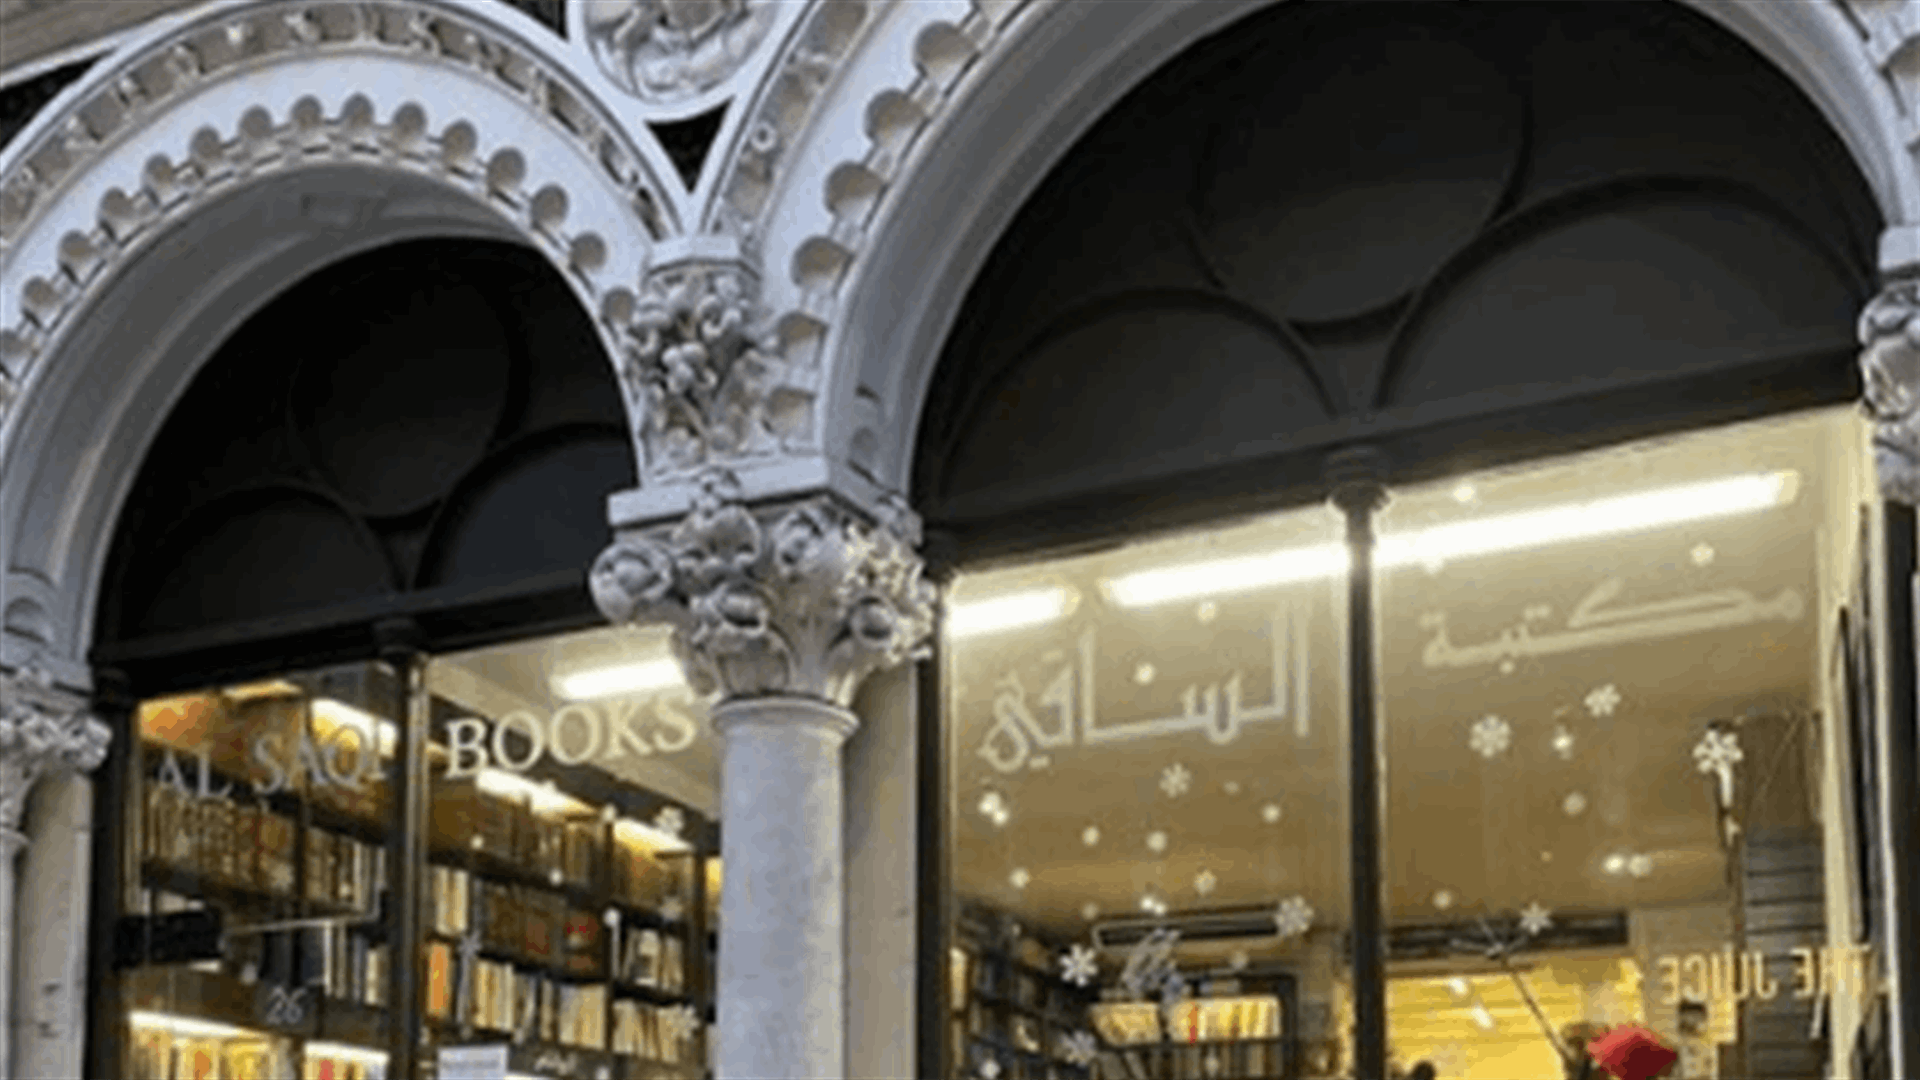 London’s most prominent Lebanese and Middle Eastern bookshop is closing its door permanently in December